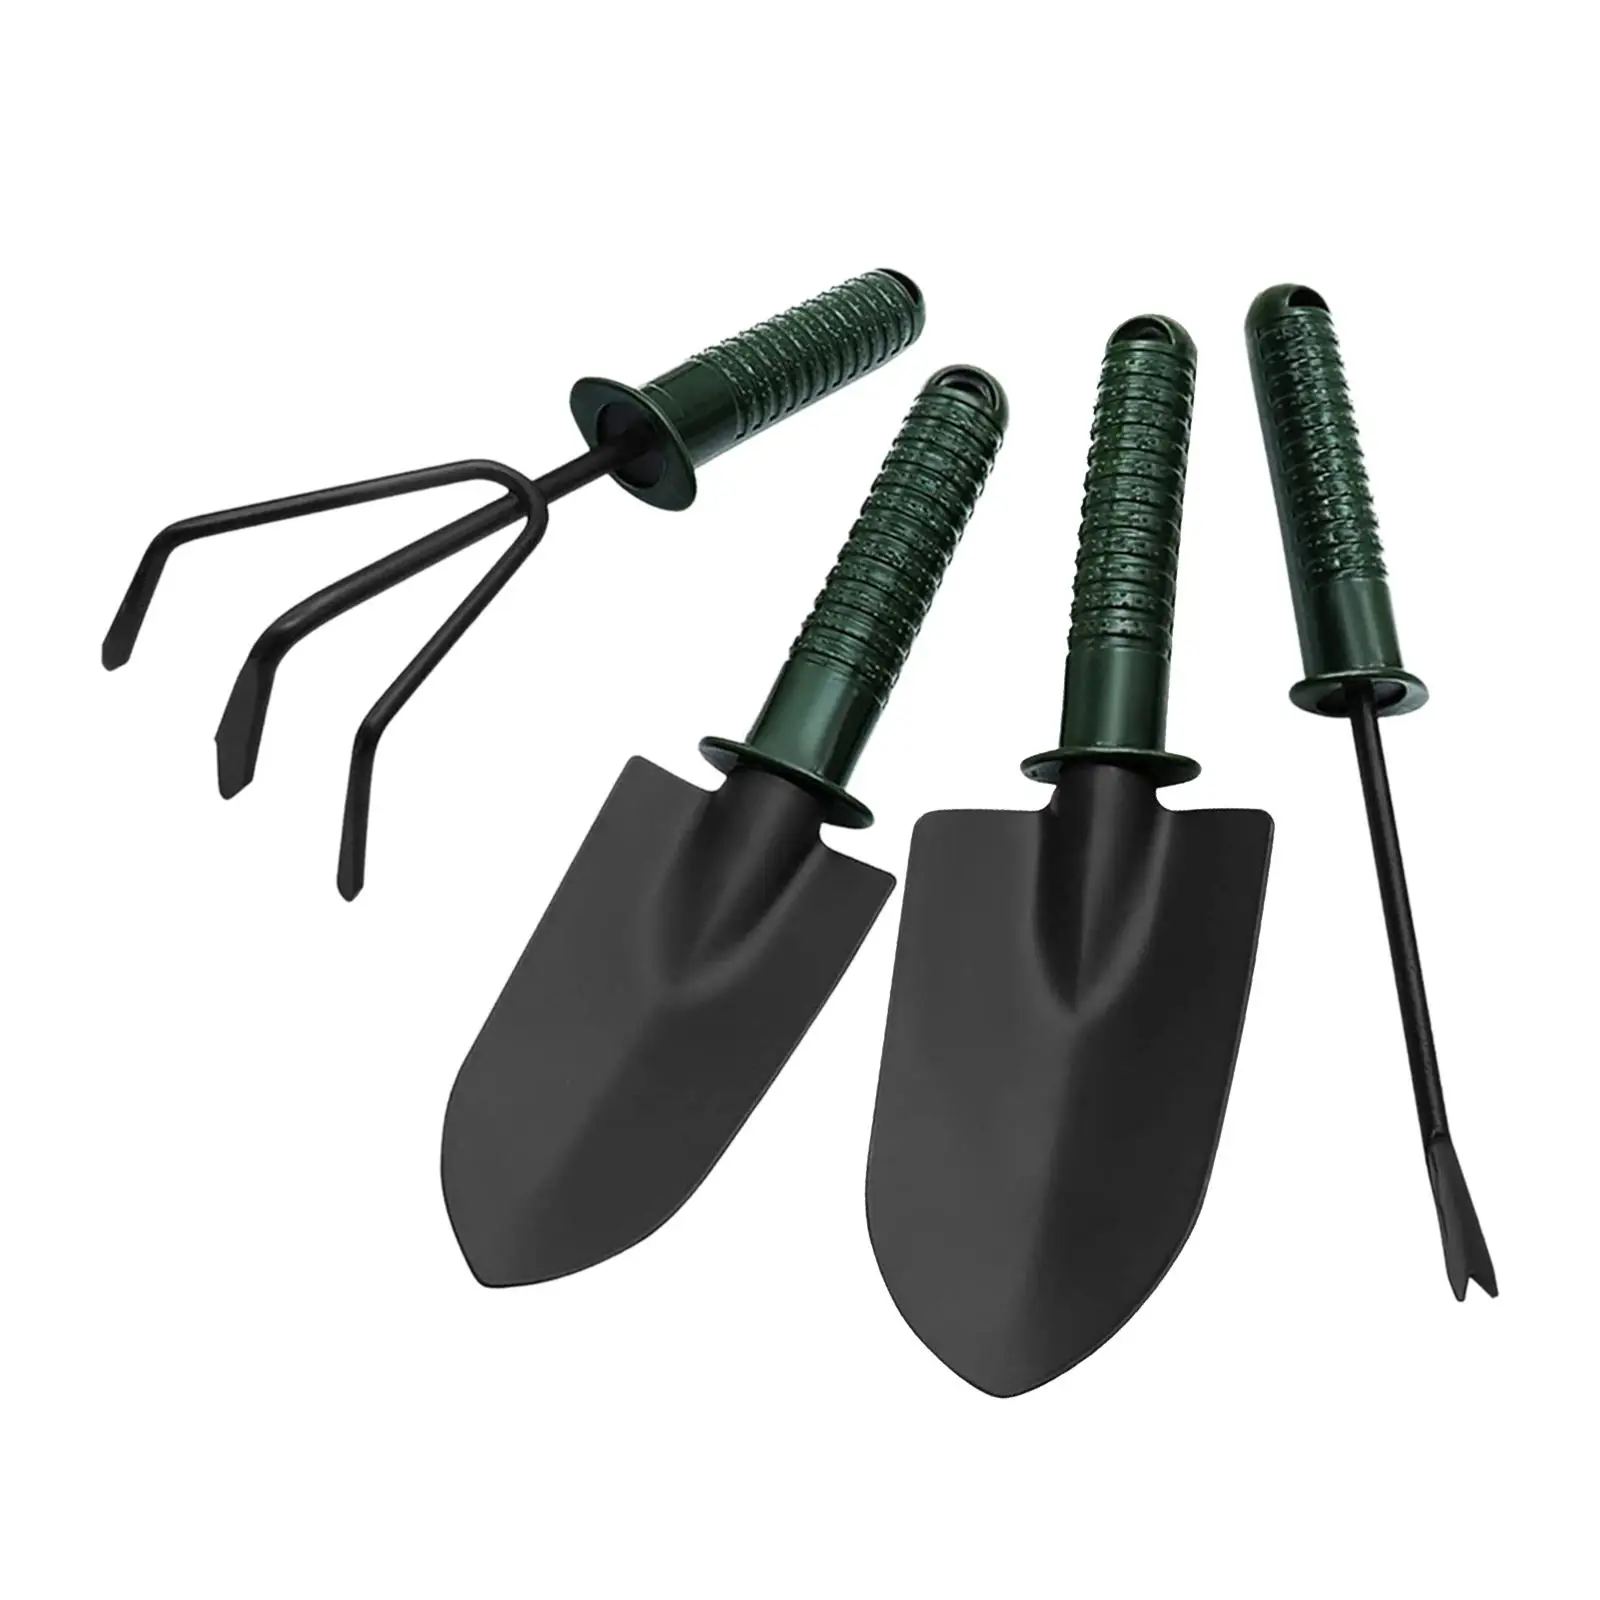 4 Pieces Gardening Tools Planting Tools Vegetables Digging Weeding Garden Accessories for Lawn Yard Bonsai Backyard Mom Gifts